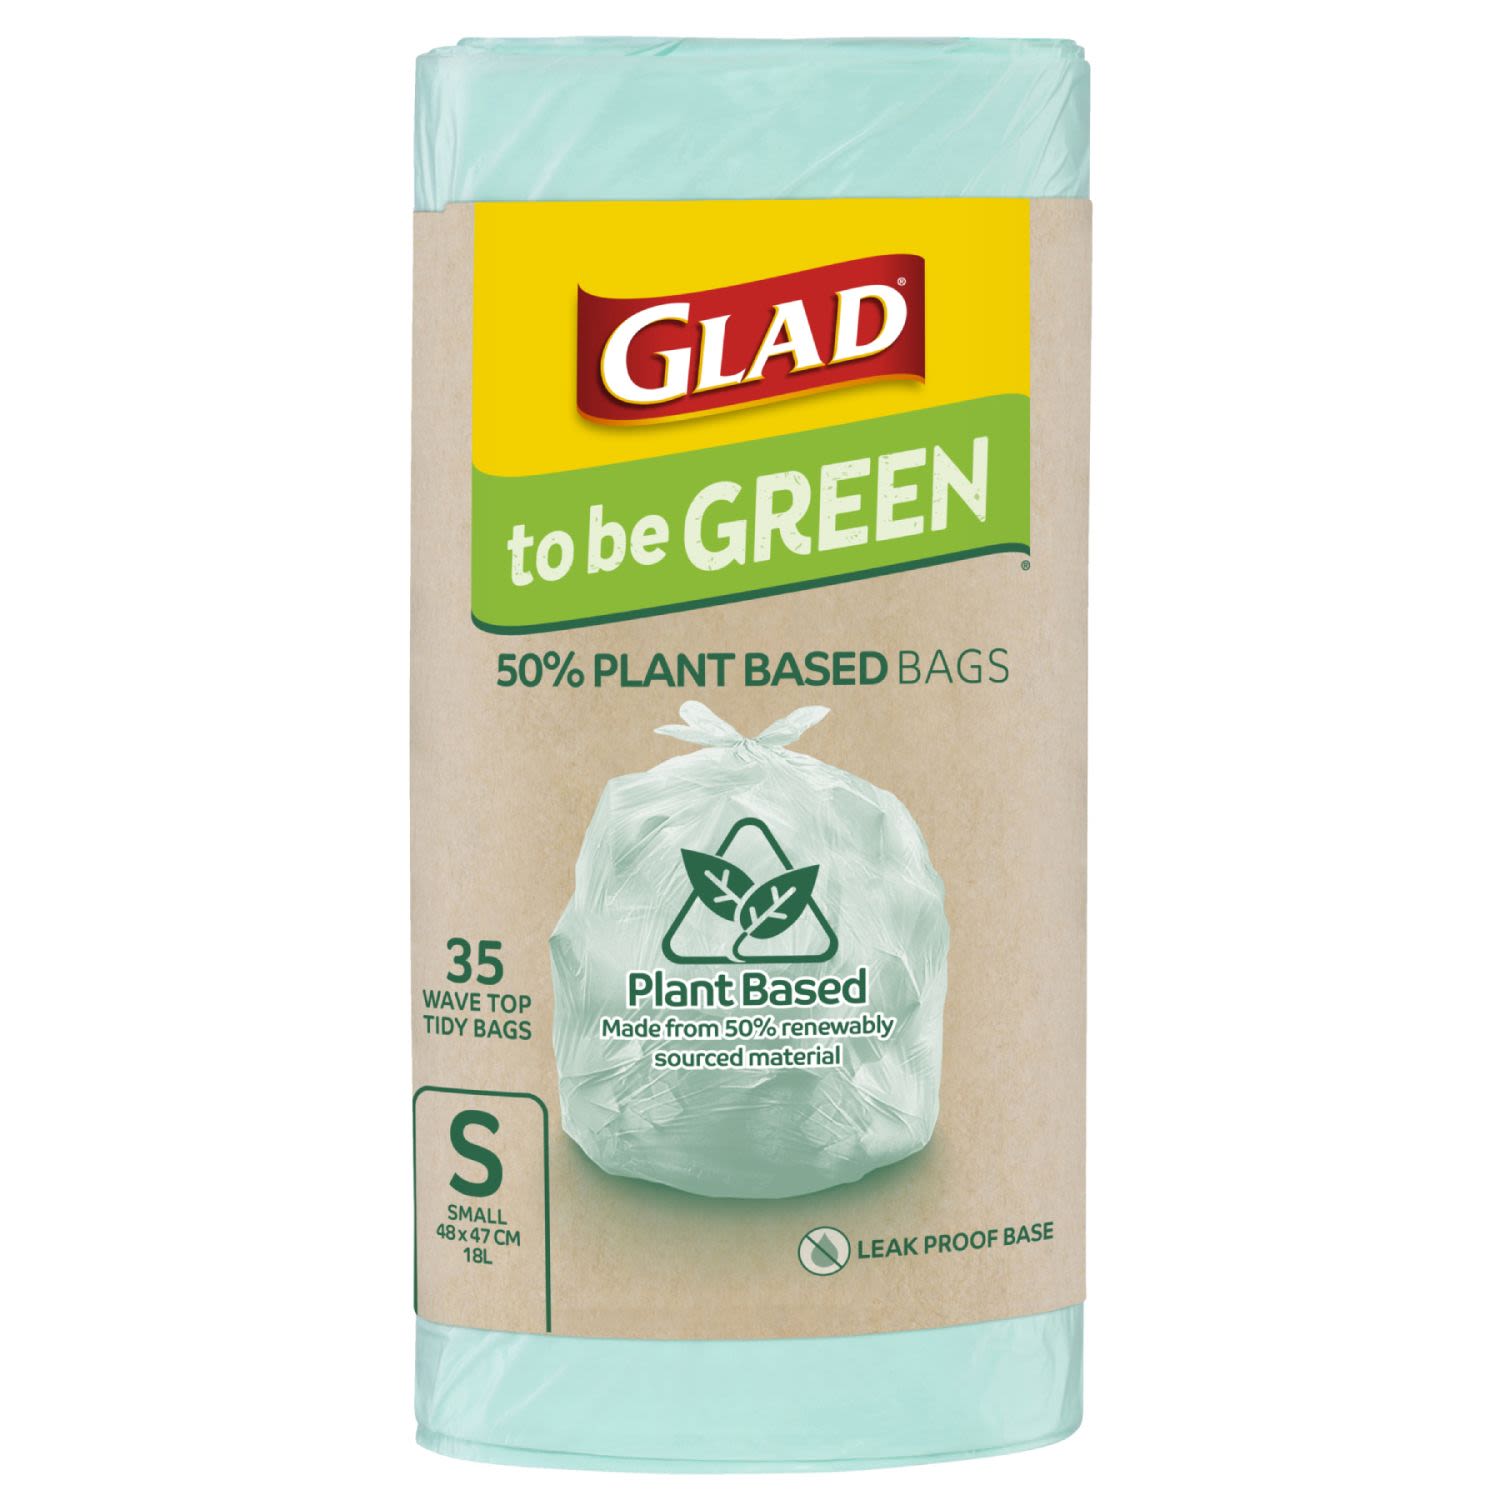 Glad to be Green 50% Plant Based Bags Smal, 35 Each